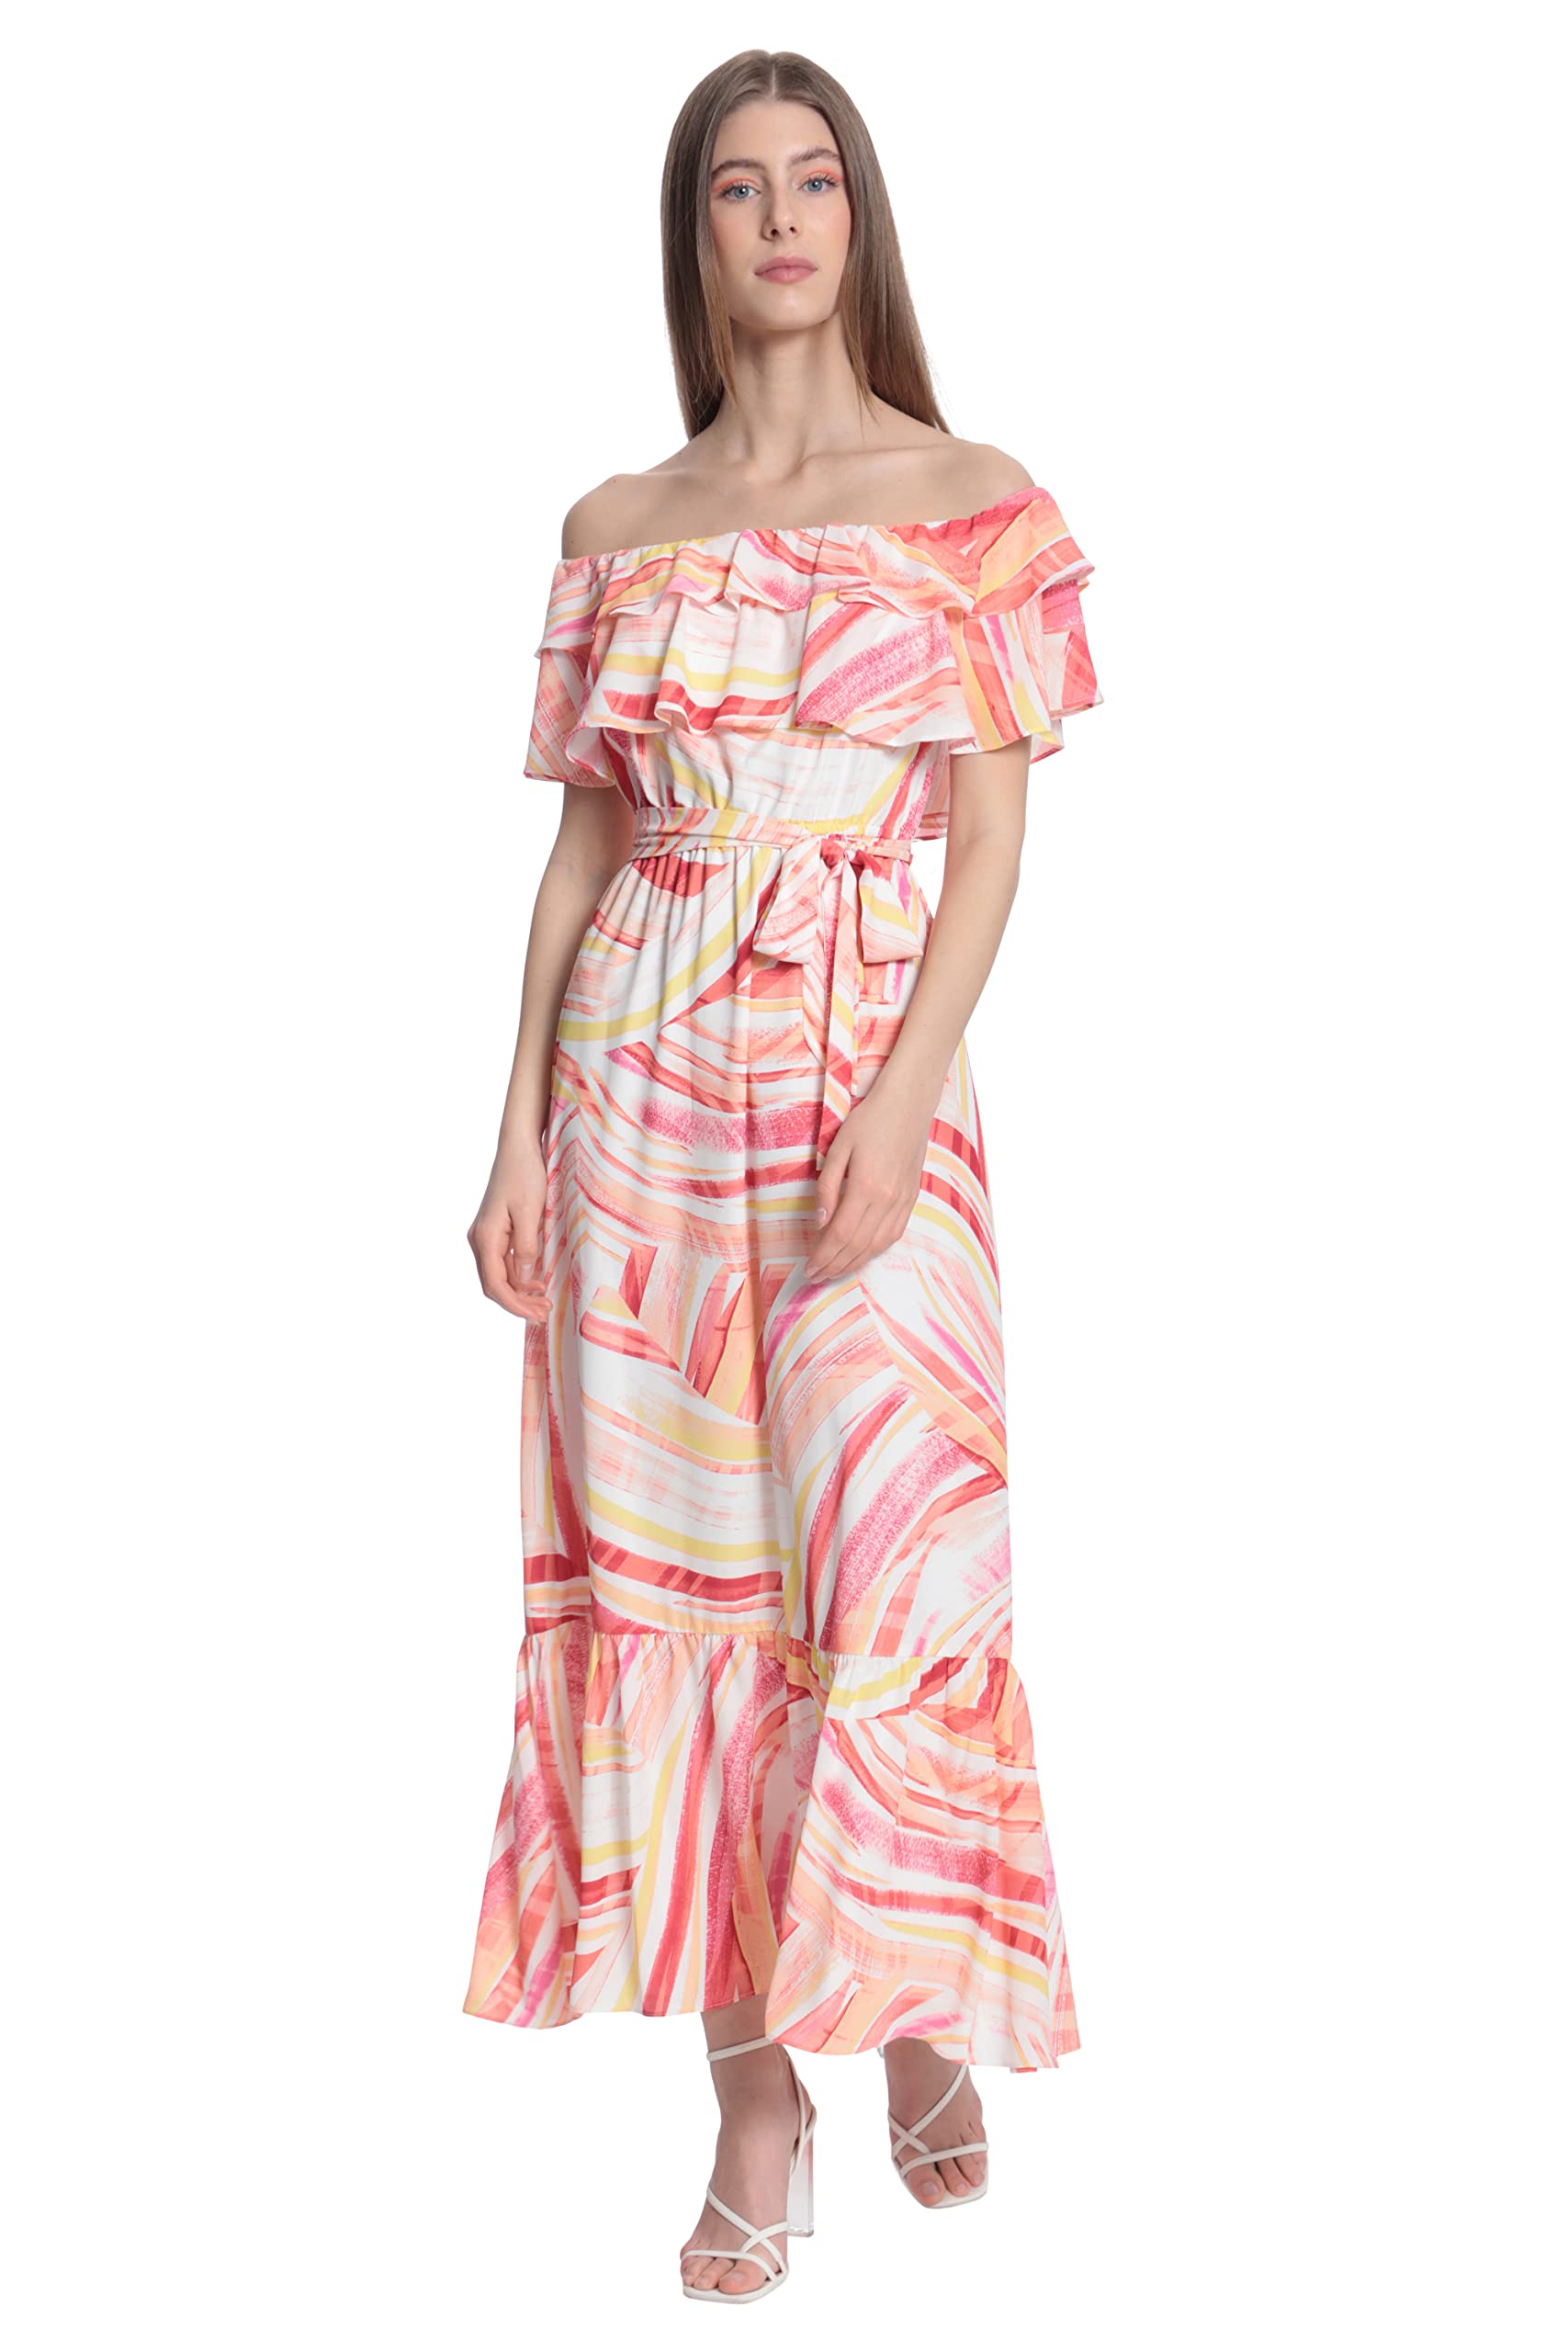 Donna Morgan Women's Maxi Dress with Off The Shoulder Ruffle and Bottom Skirt Tier